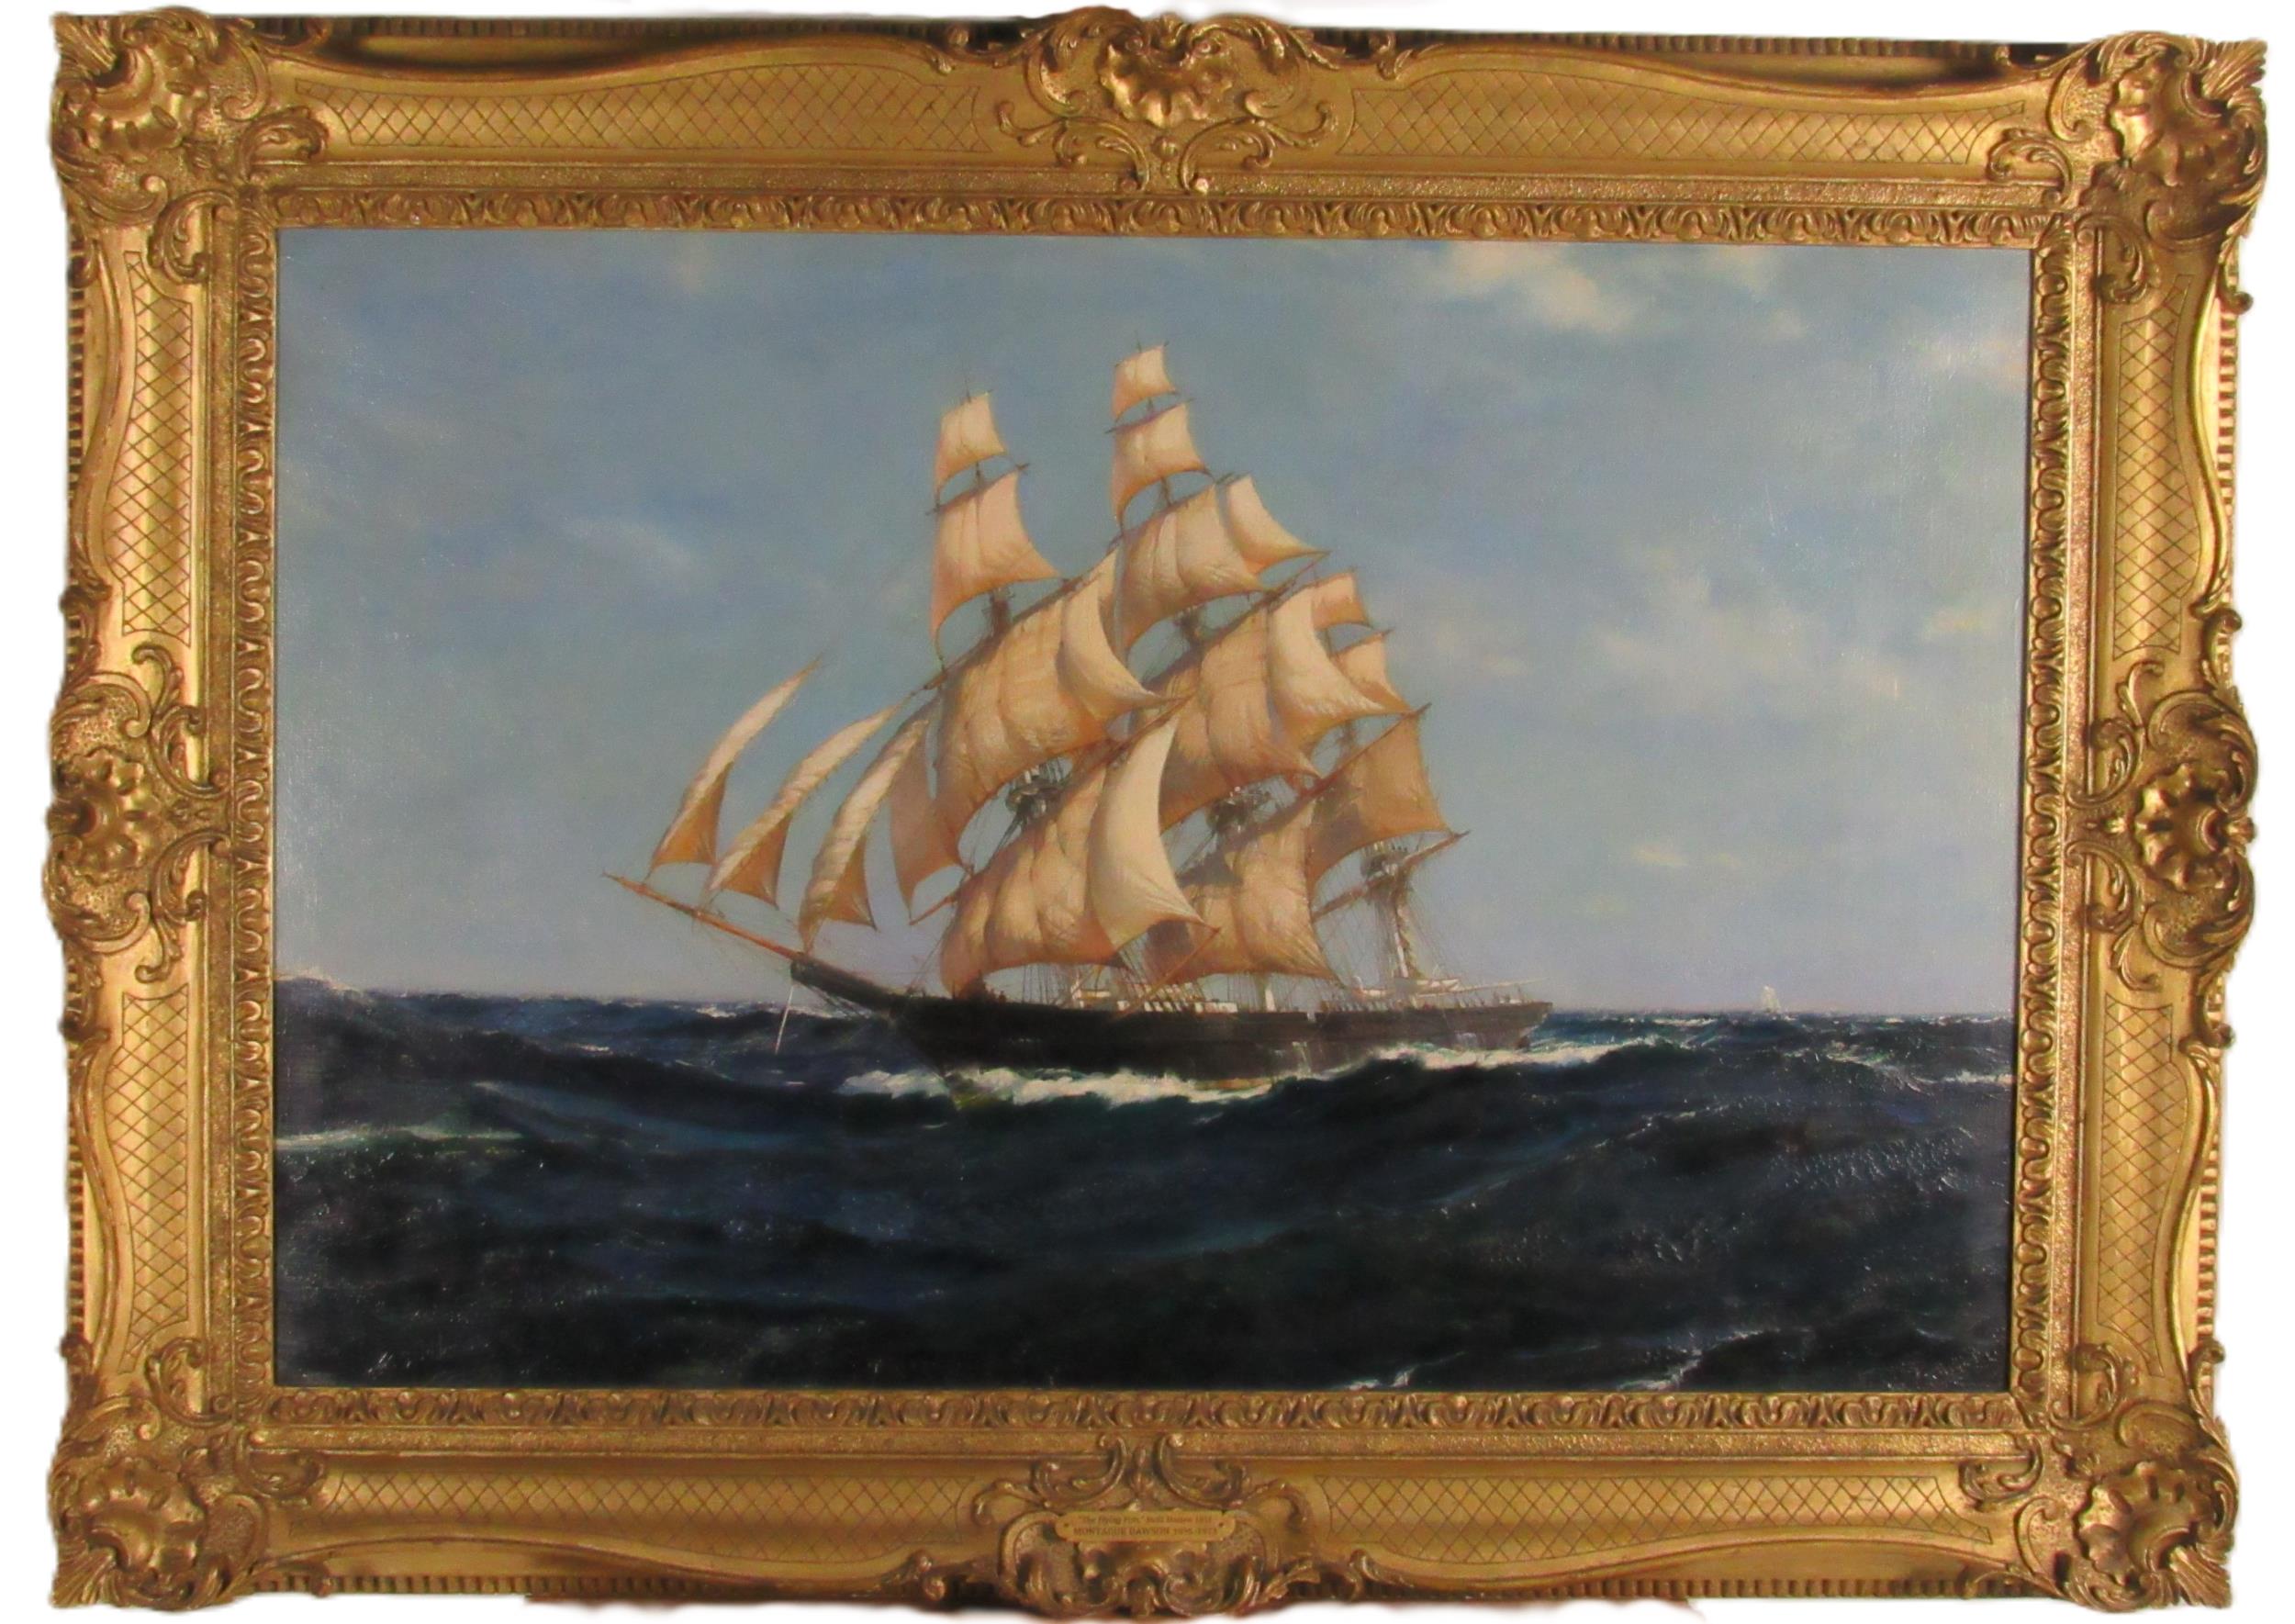 Montague Dawson (1895-1973) "The Clipper Ship Flying Fish c. 1950," O.O.C.,   signed l.l. ‘Montague